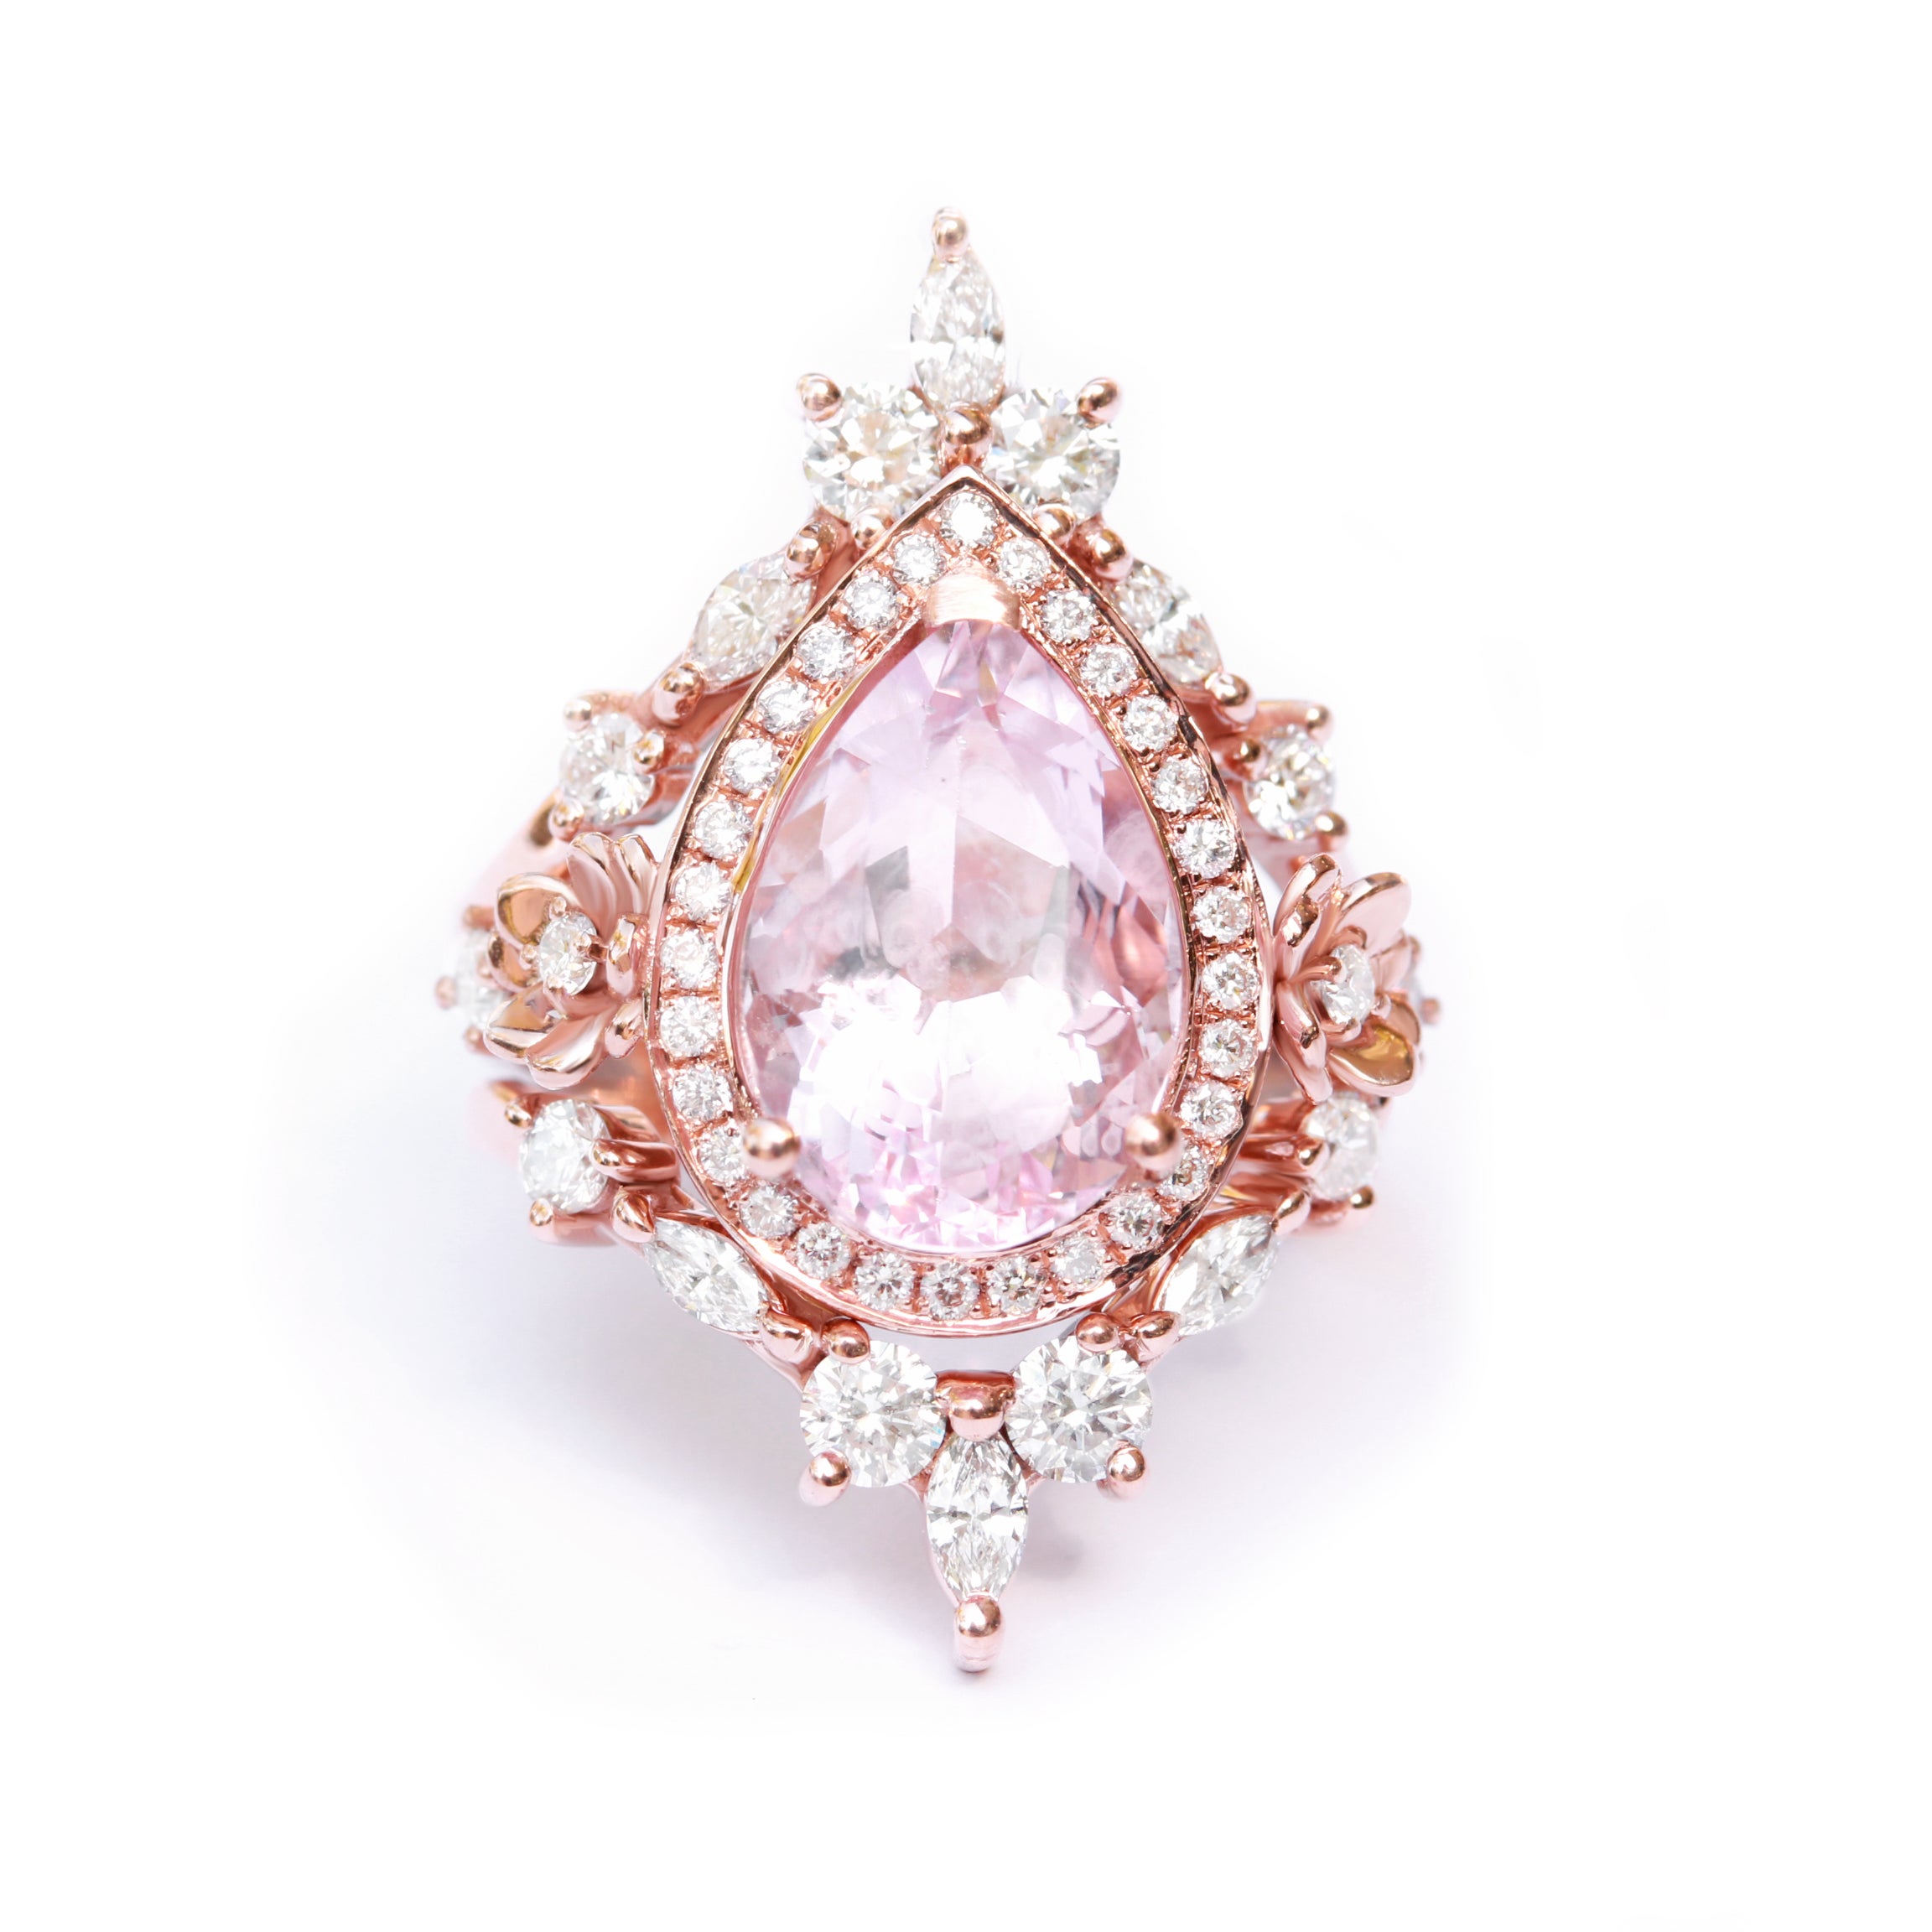 Excellent pear-shaped morganite diamond halo engagement ring - Antheia.
Antheia was the goddess of flowers and flowery wreaths.
This list is for the engagement ring only.
Handmade with care. 
An original design by Silly Shiny Diamonds. 

Details: 
*